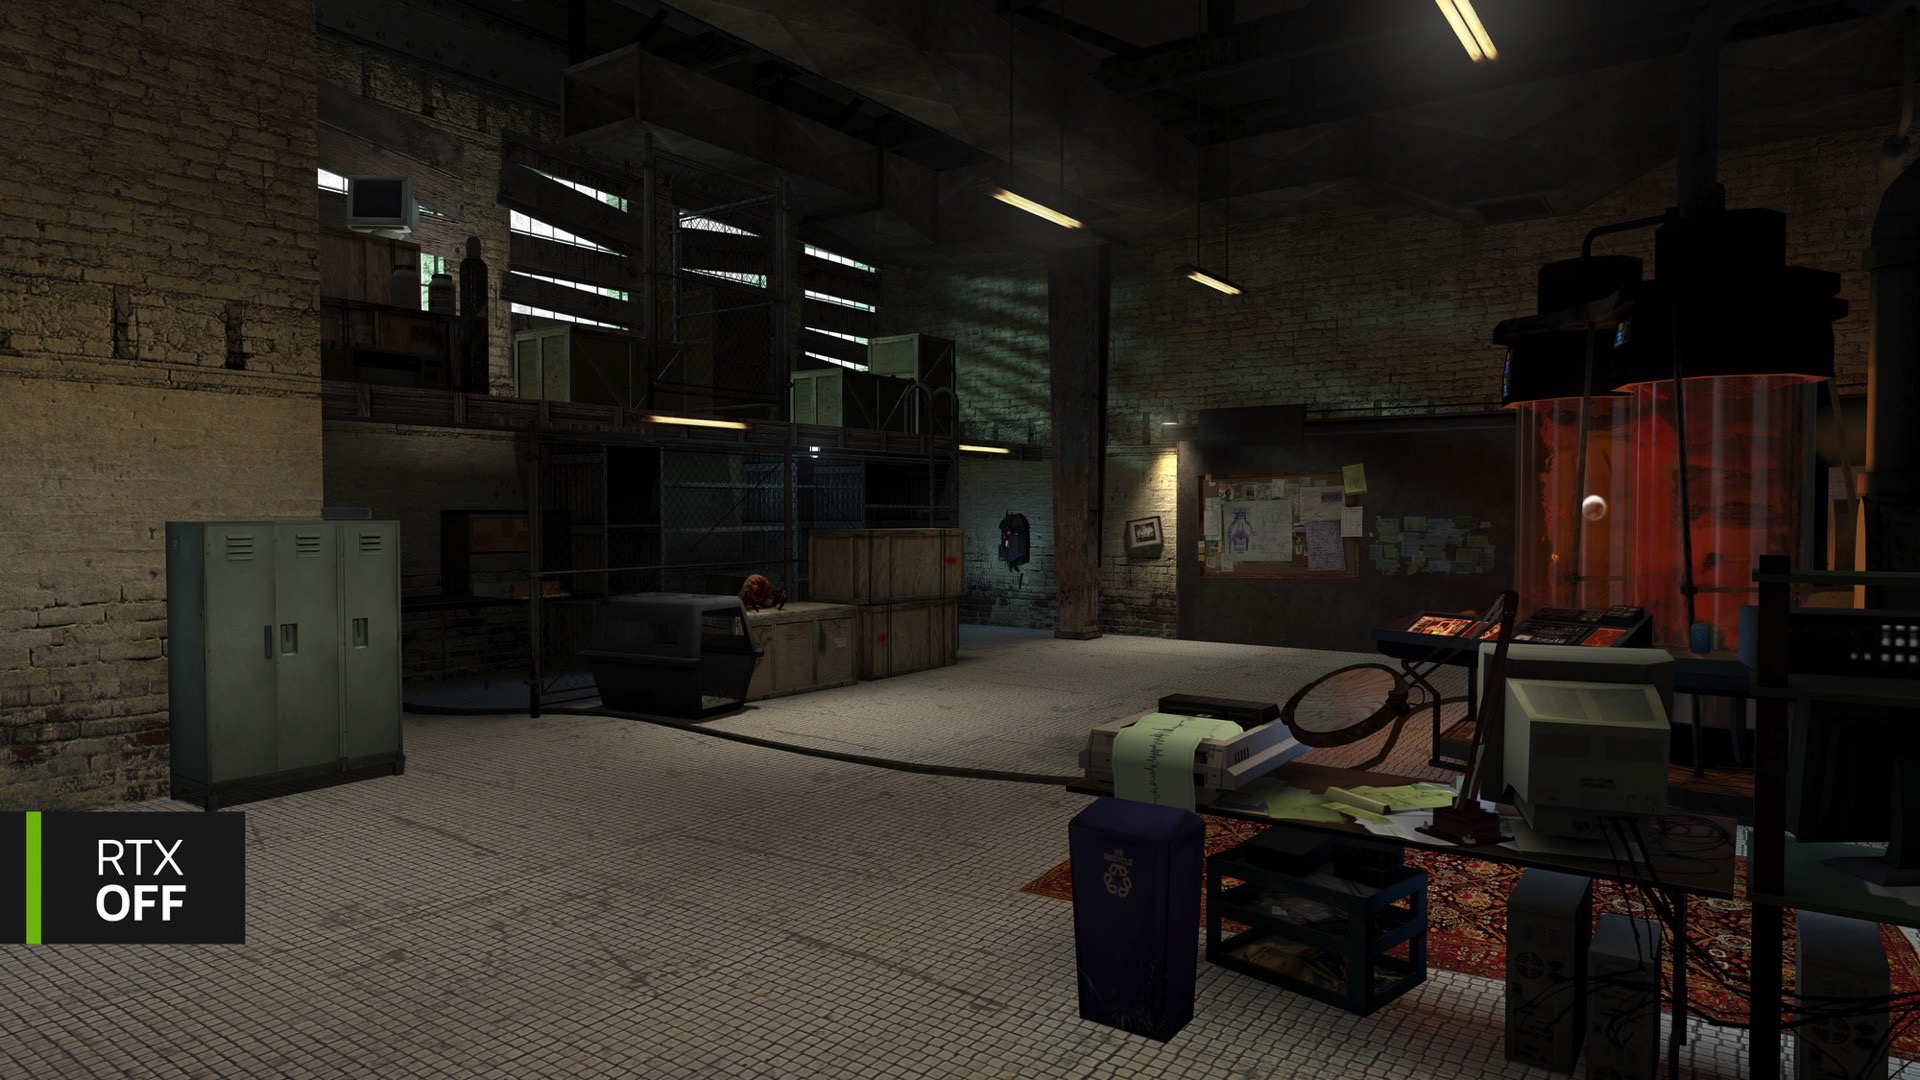 <p>Screenshots of the community 'Half-Life 2 RTX' project and the unmodified game.</p>
